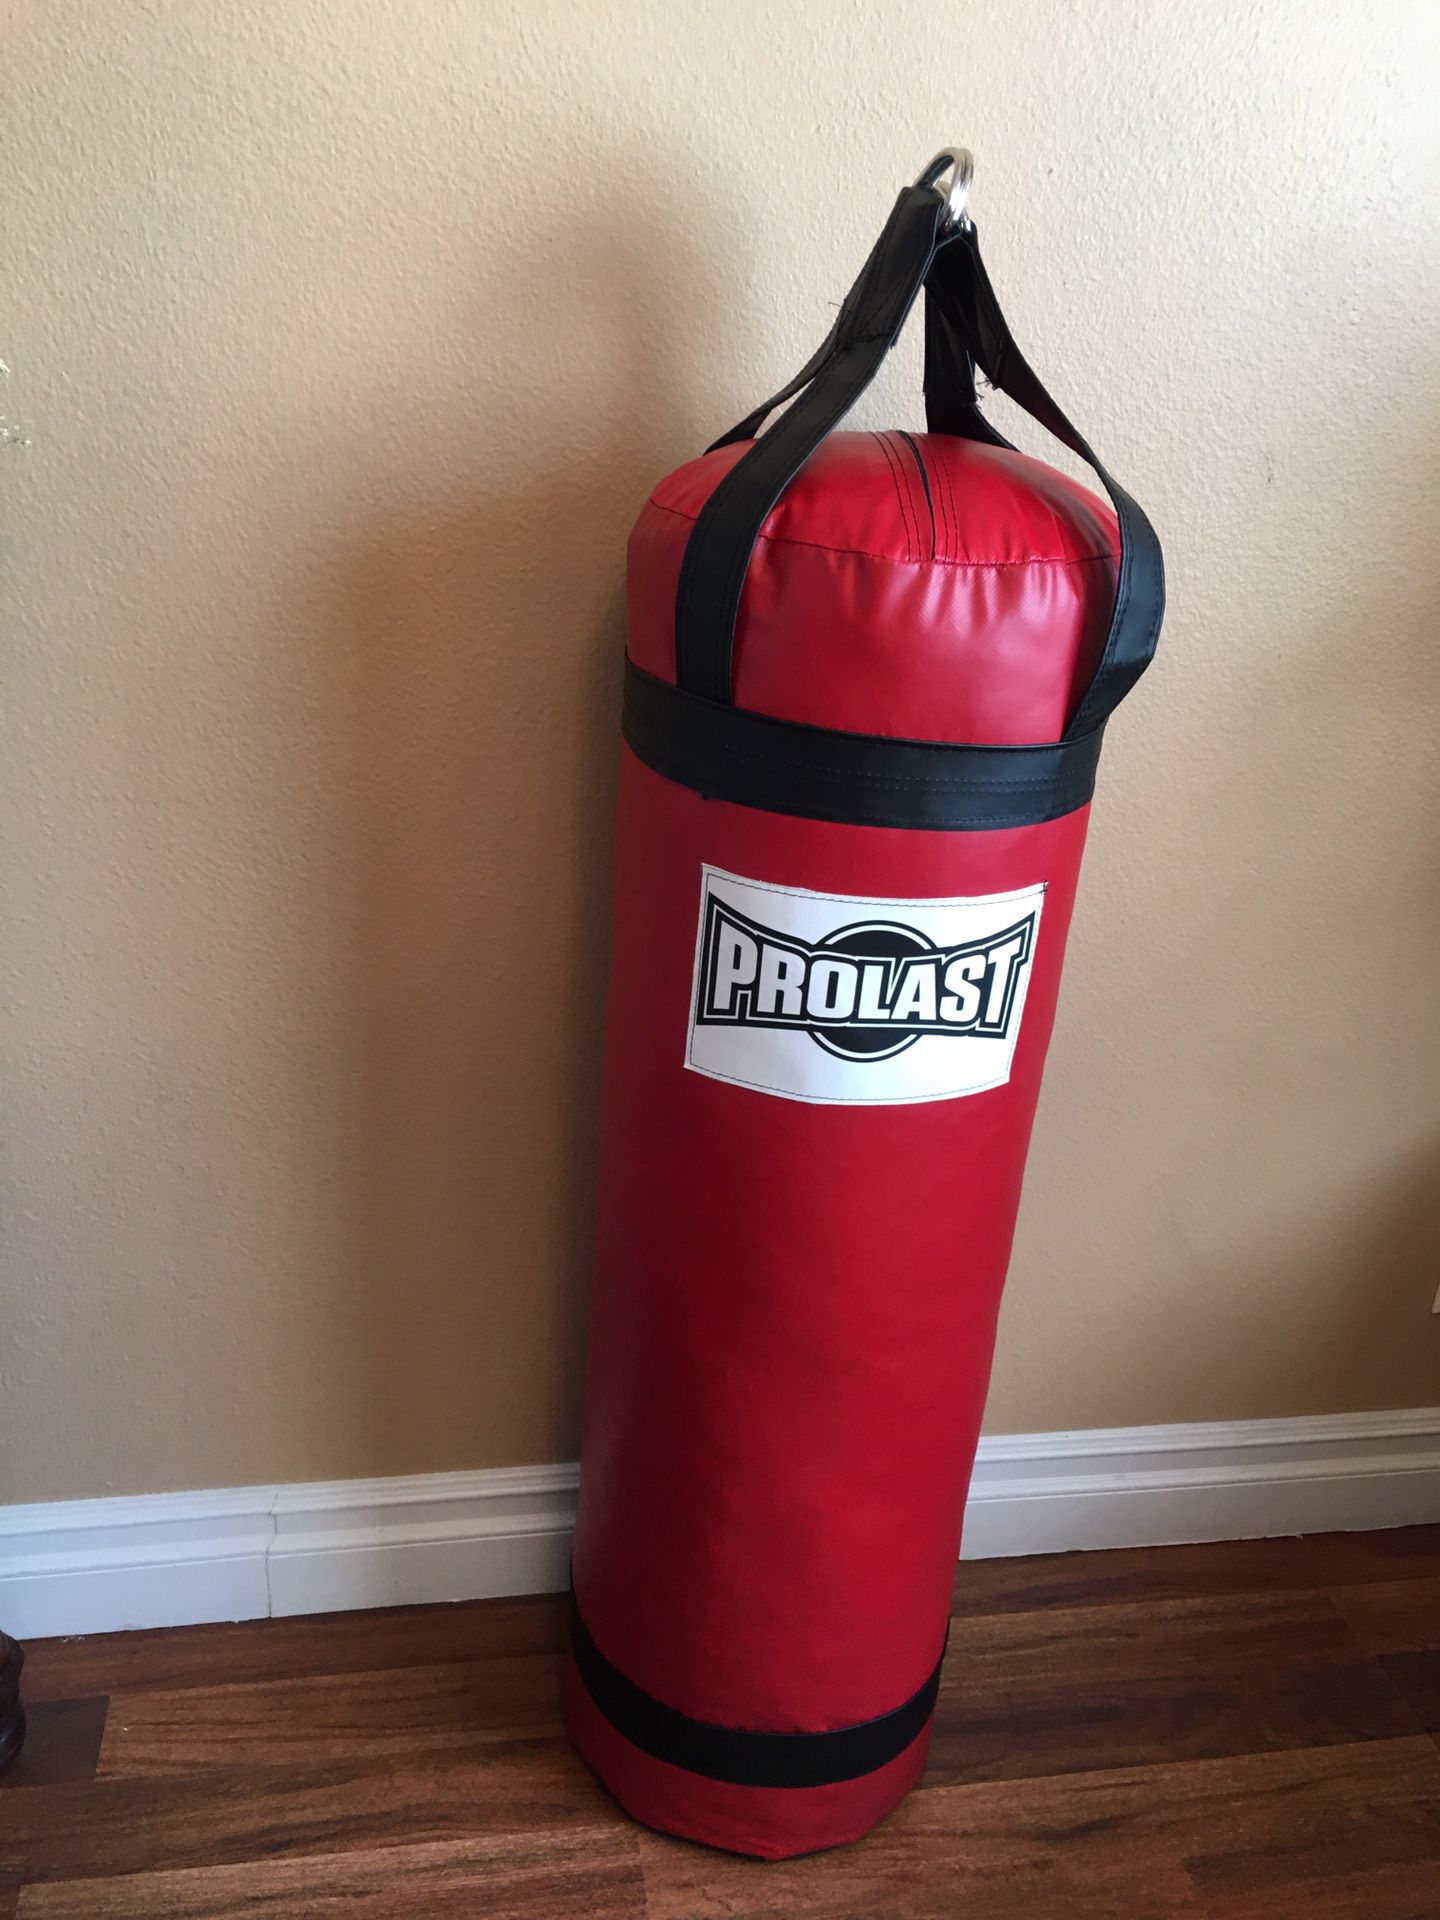 PUNCHING BAG BRAND NEW 100 POUNDS FILLED LUXURY ABOUT FIVE FEET TALL HEAVY MADE USA 🇺🇸 